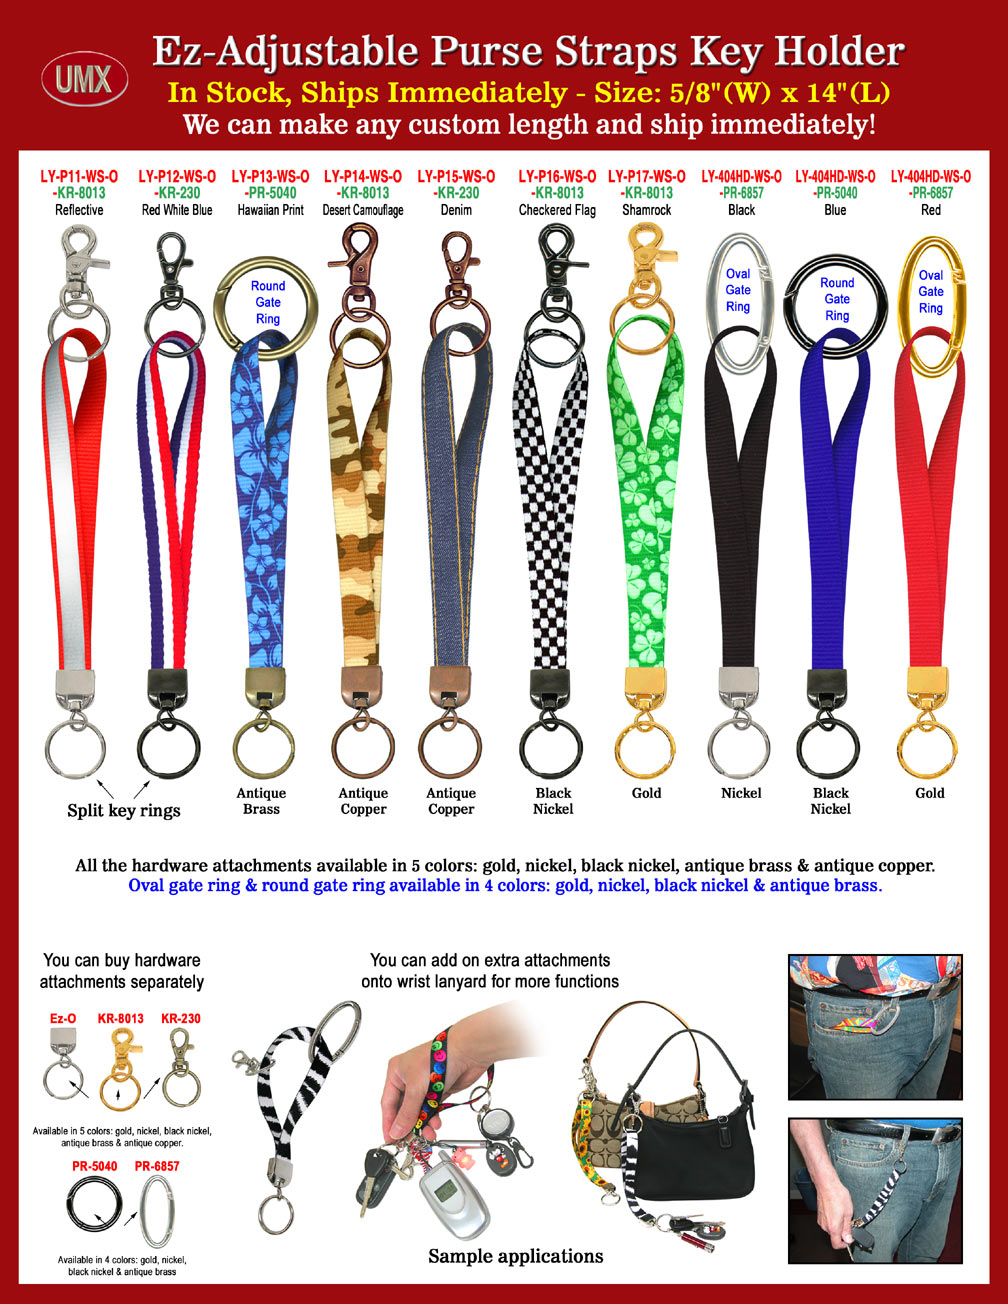 Key Holder Lanyards With Sunflower, Reflective, Red-White-Blue Stripes, Hawaiian, Desert Camo and Woven Denim Patterns.